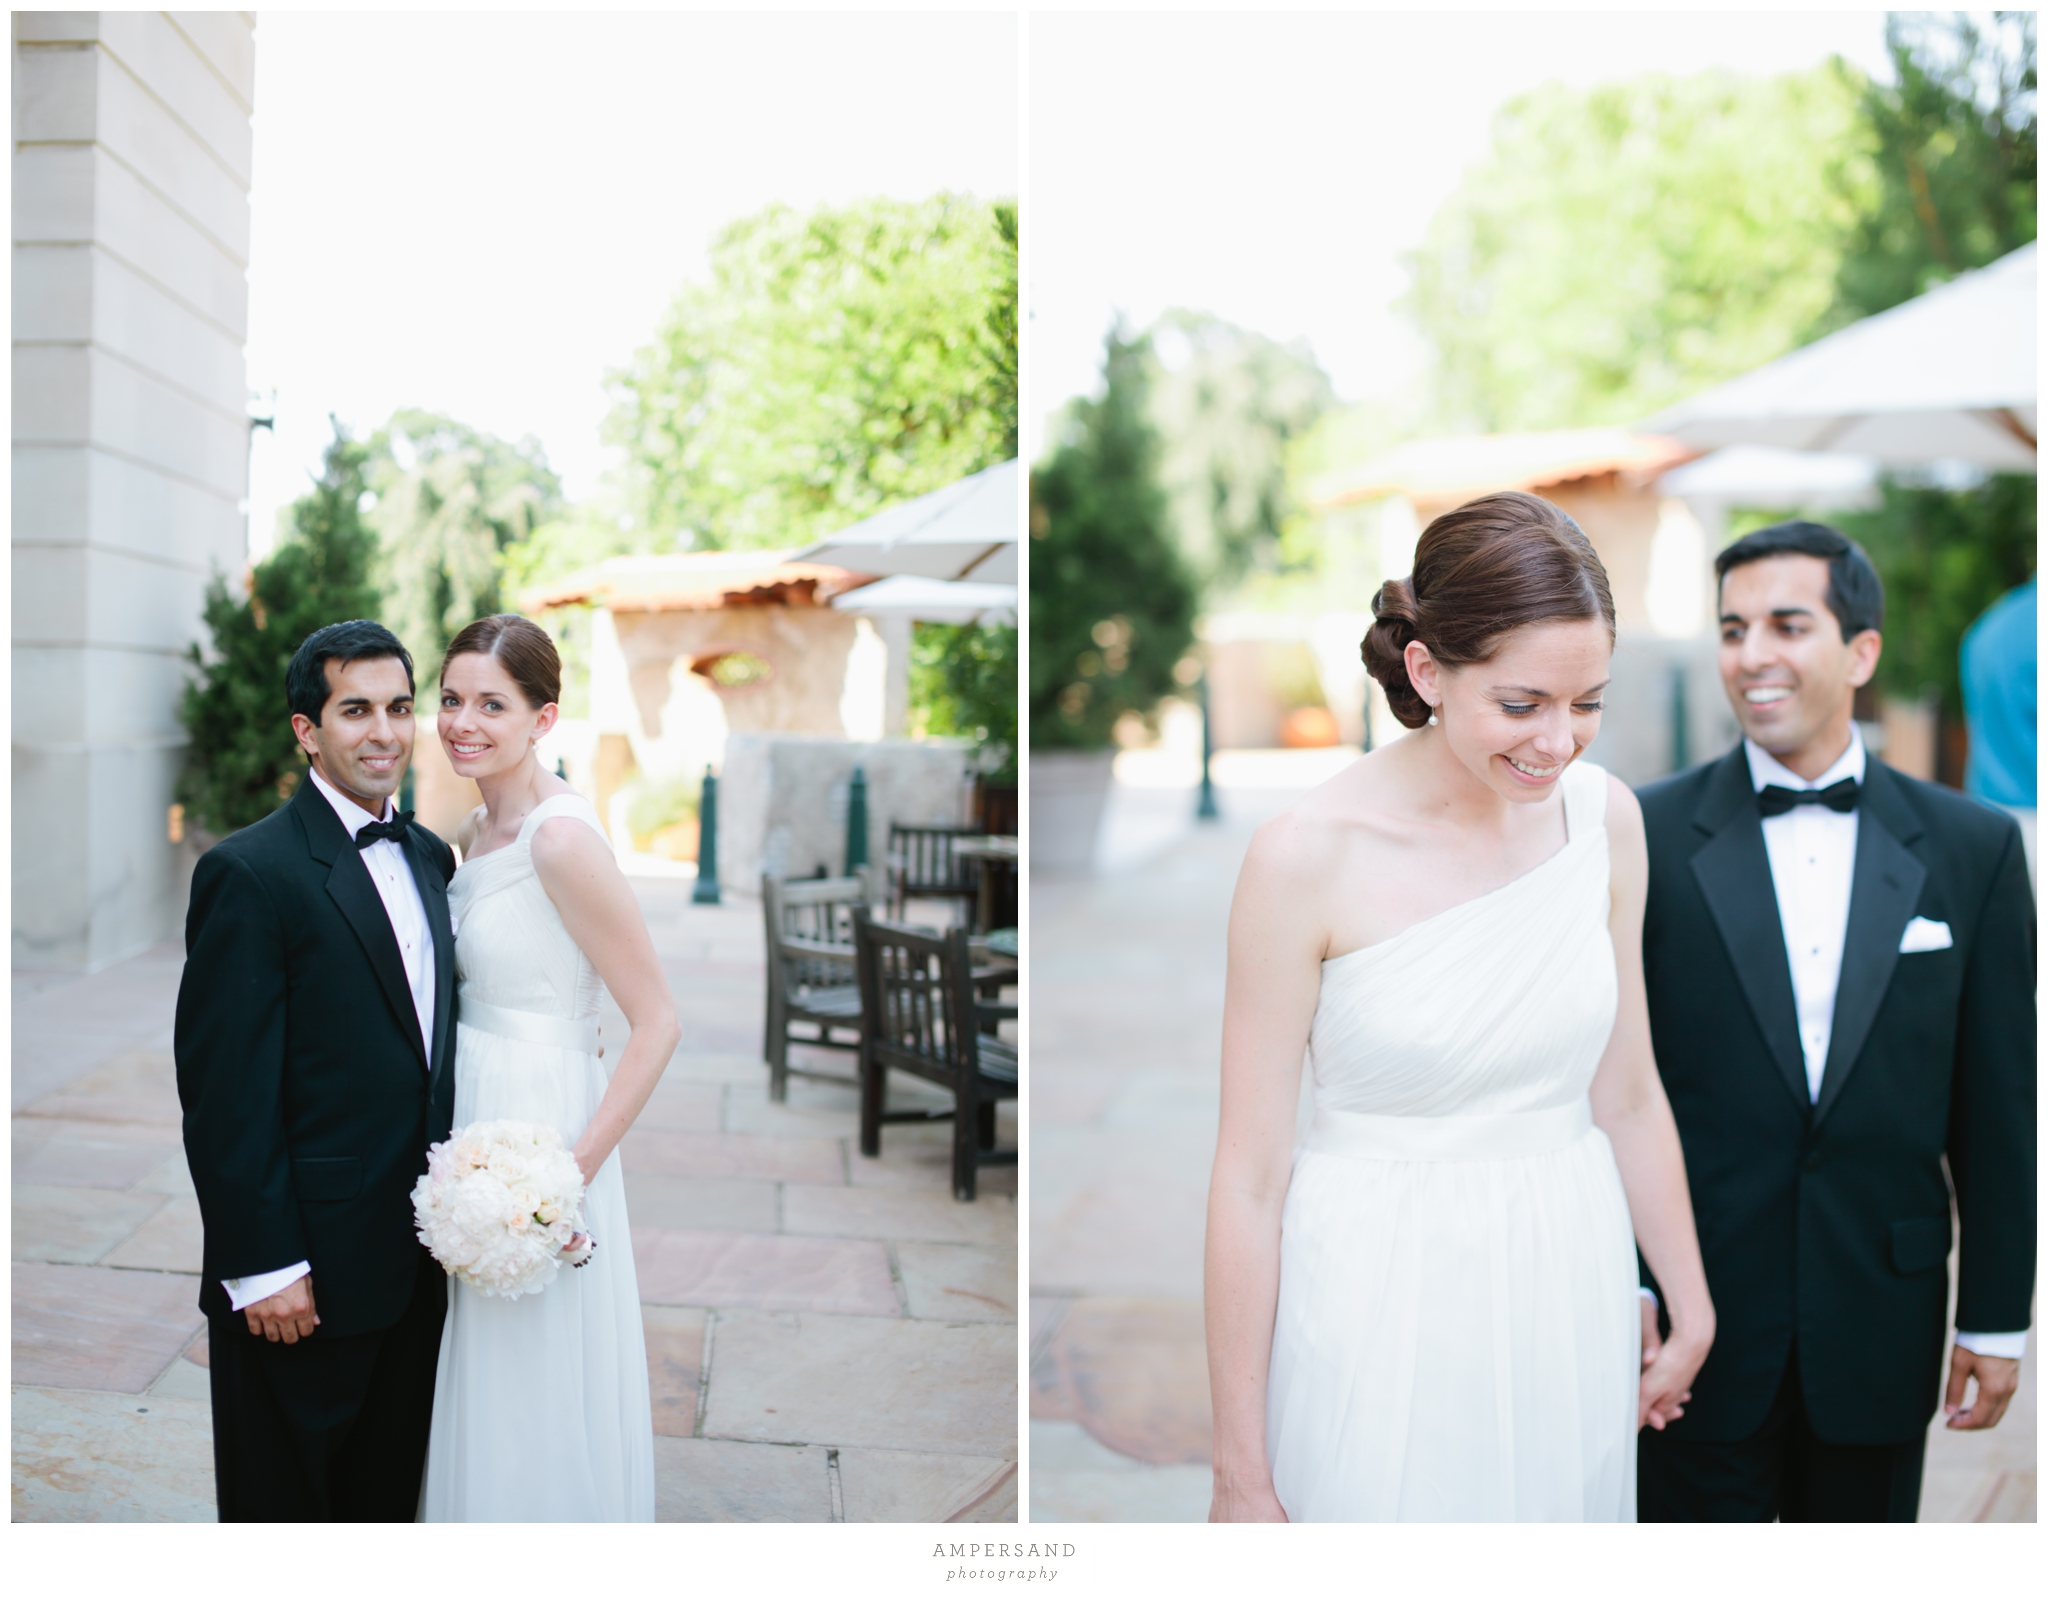 Bride & Groom  // Photos by Ampersand Photography